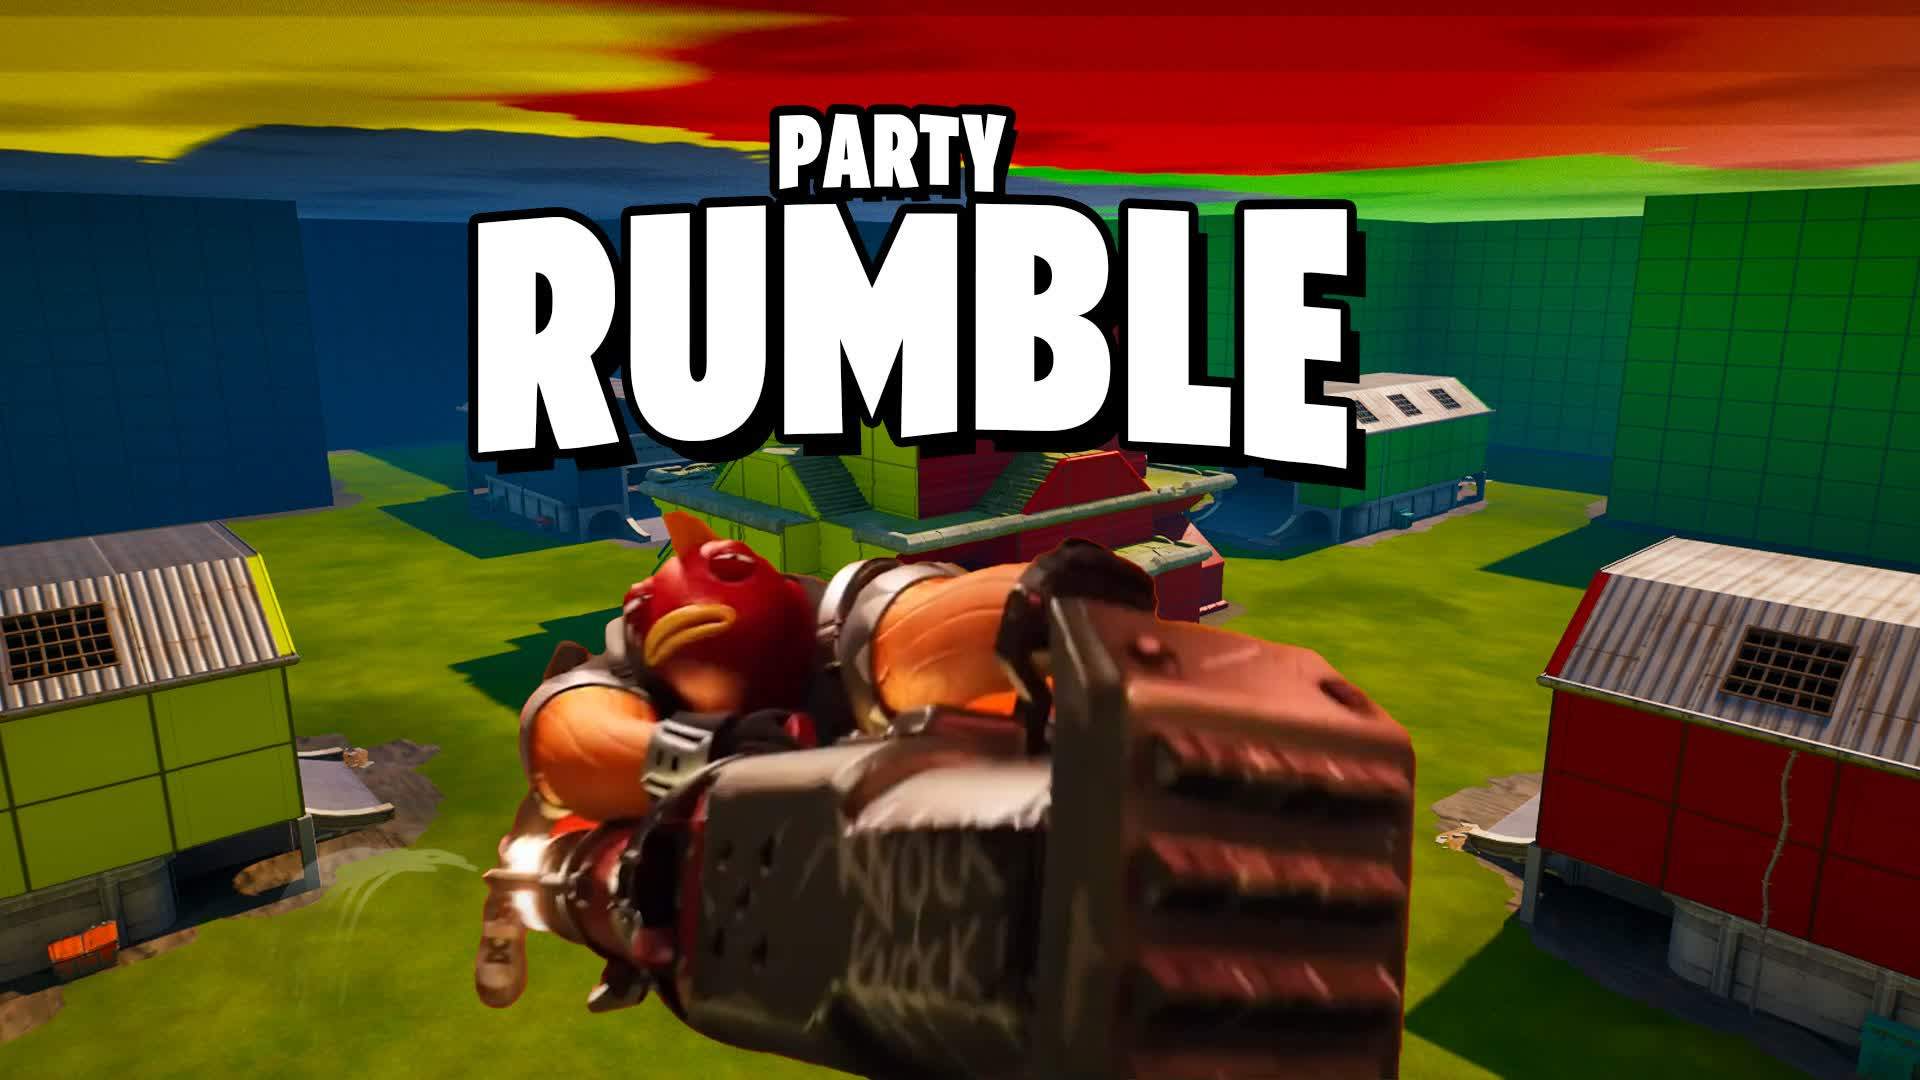 PARTY RUMBLE